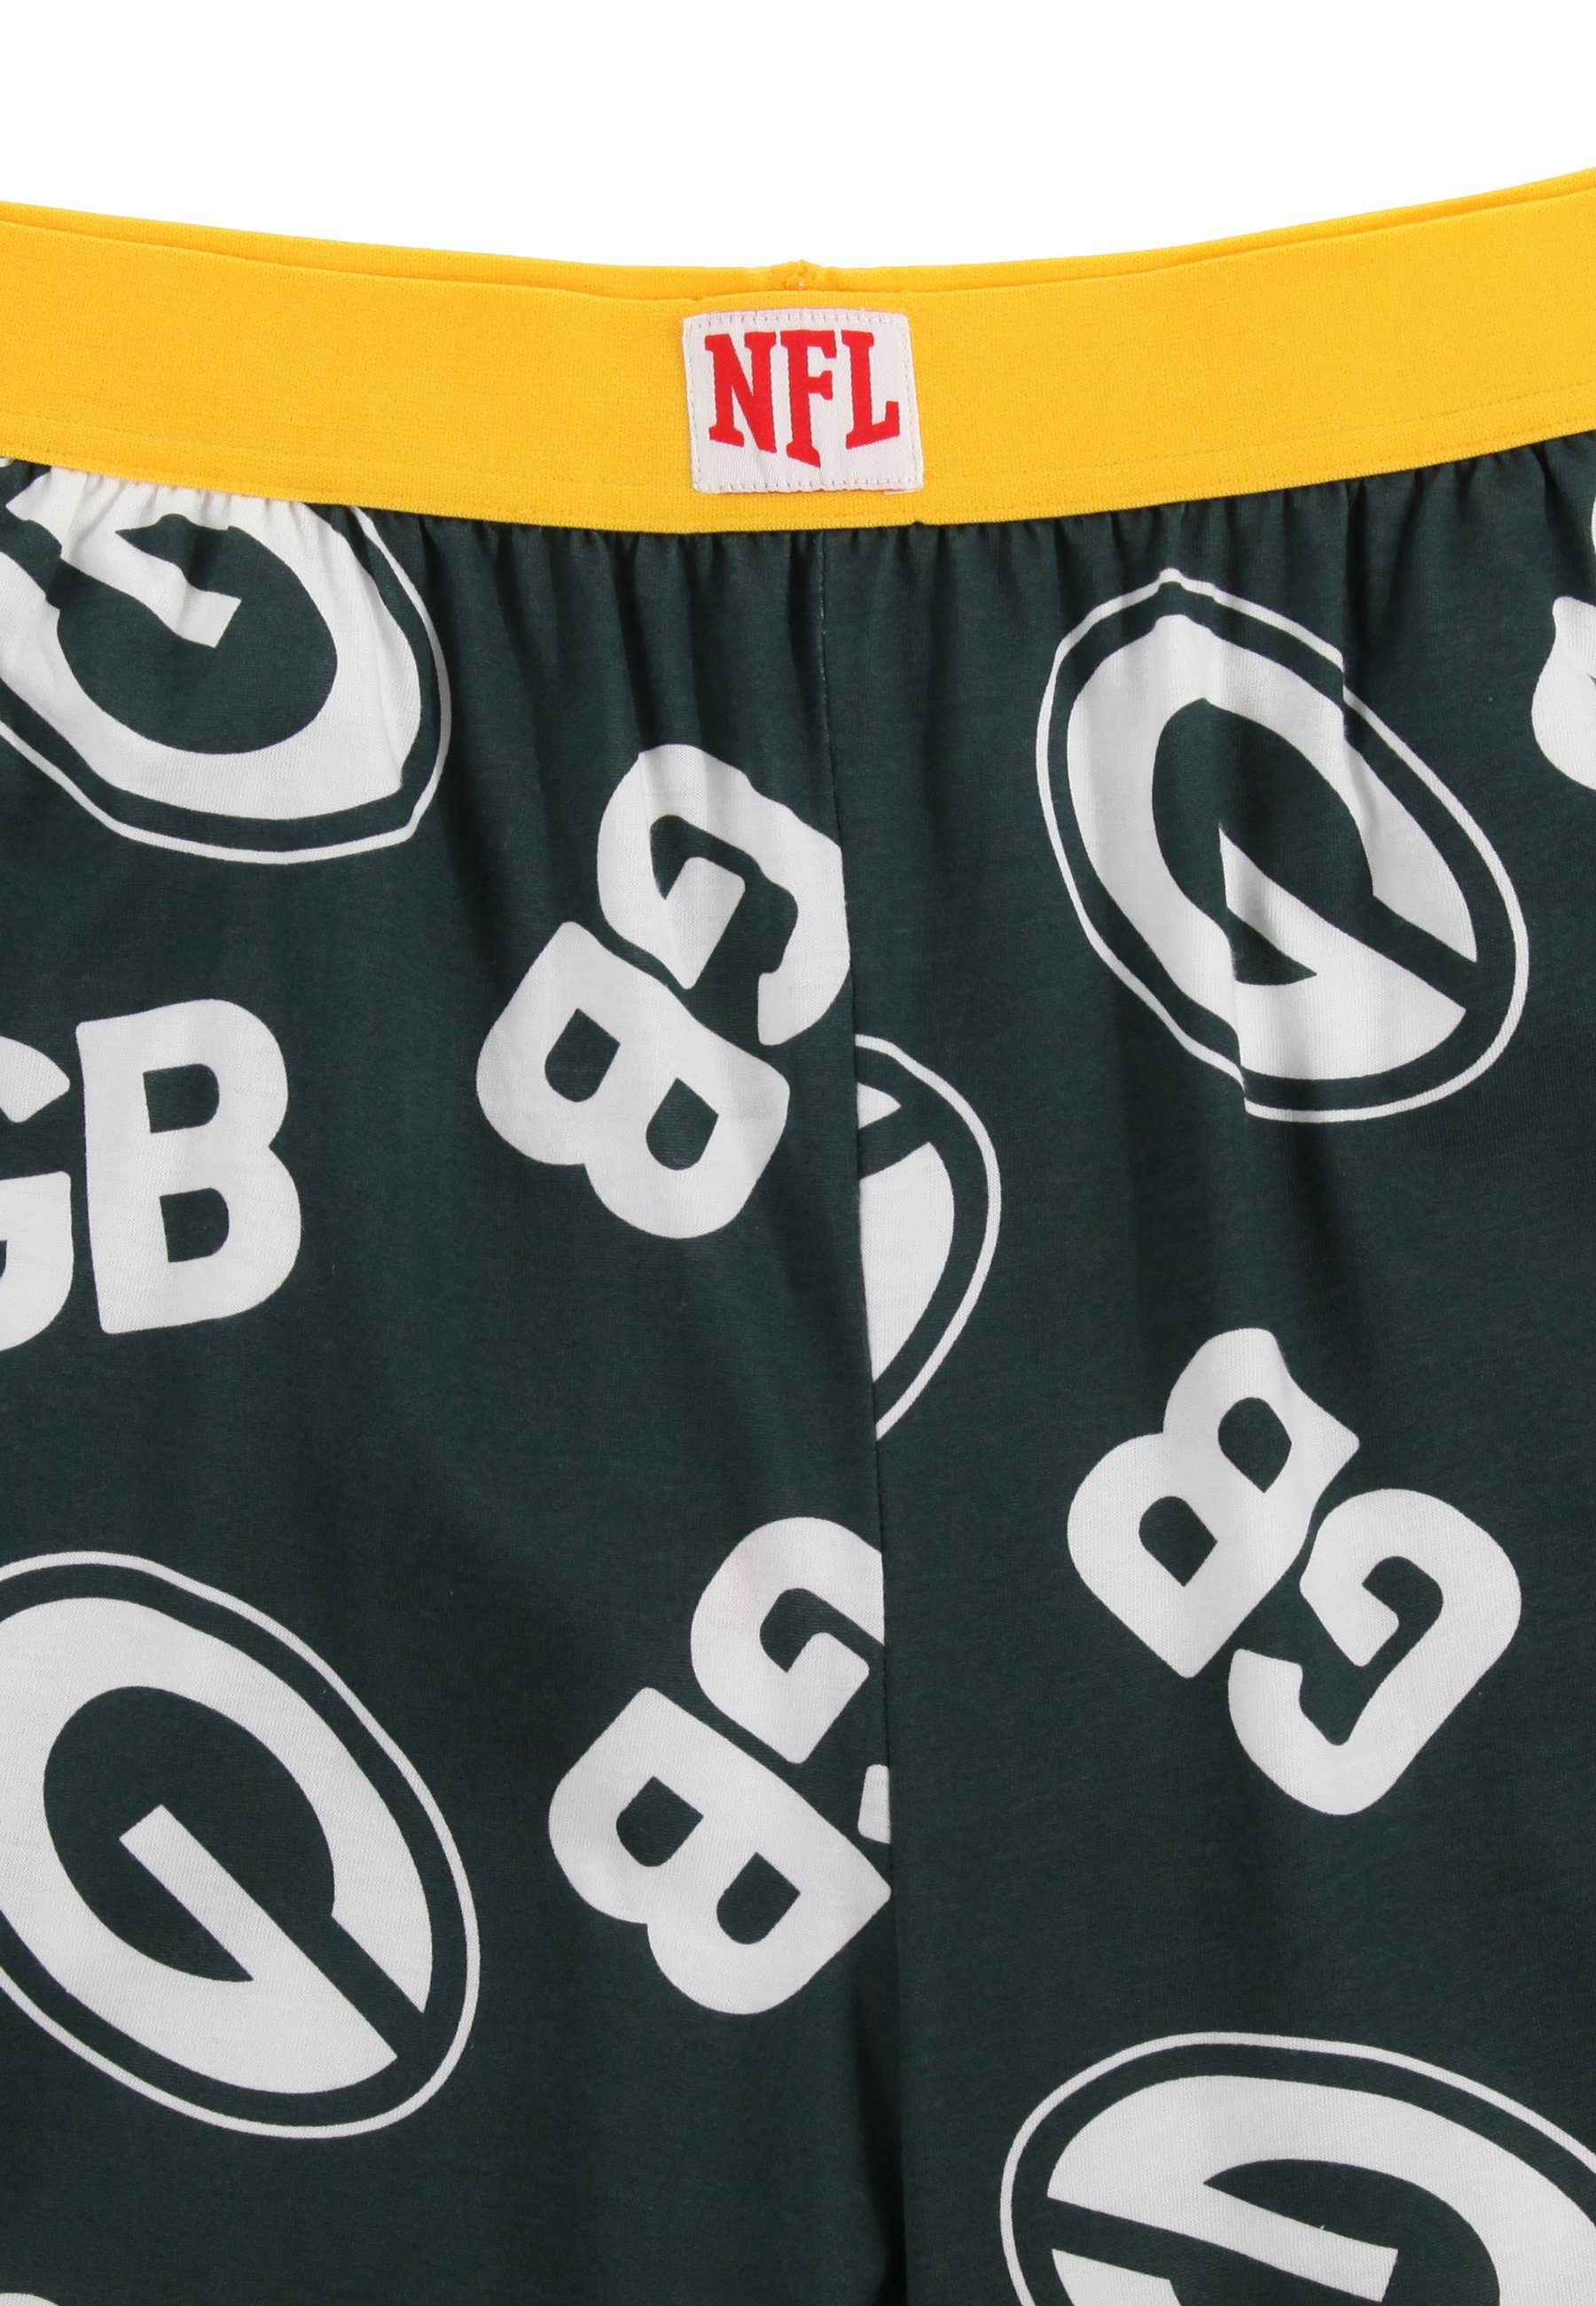 GB Bay Packers Recovered Recovered Loungepants Green Loungepants â€“ NFL Green